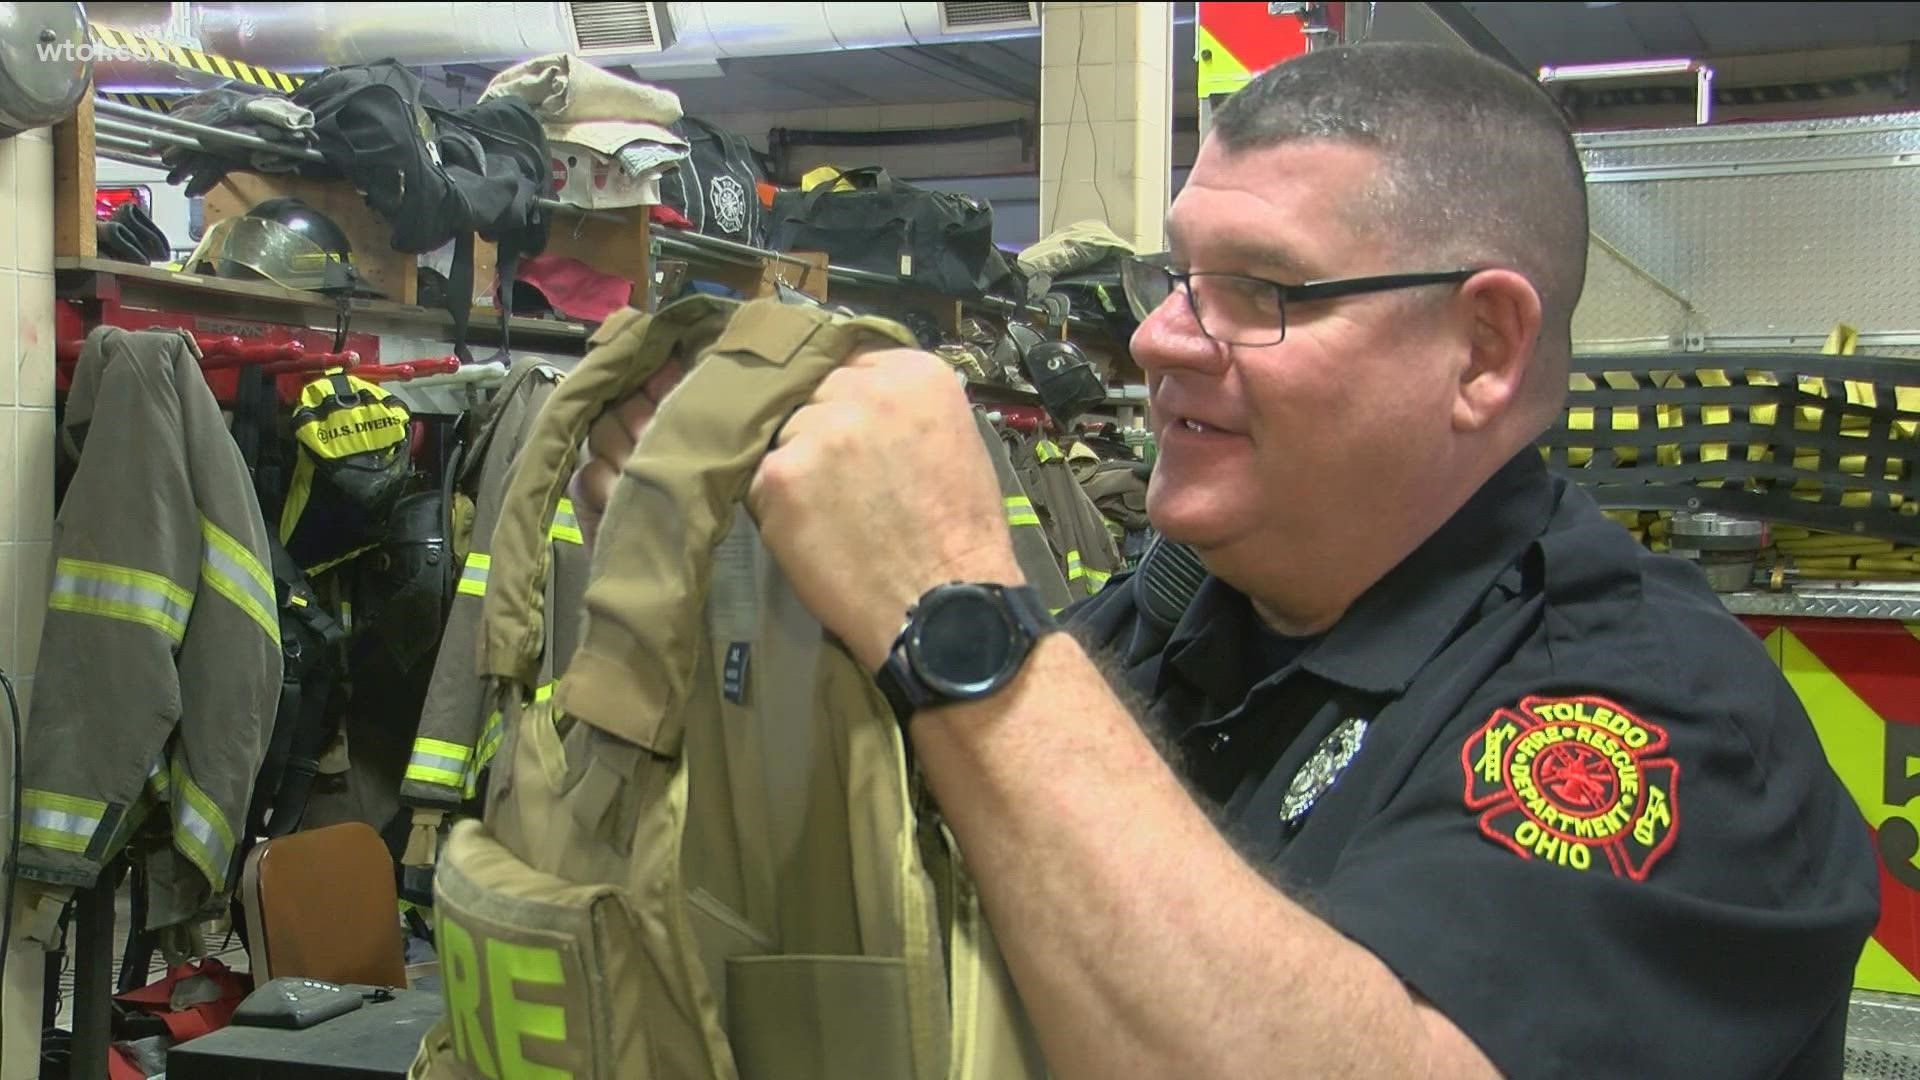 This new equipment is to make sure the first responders are safe no matter the situation.